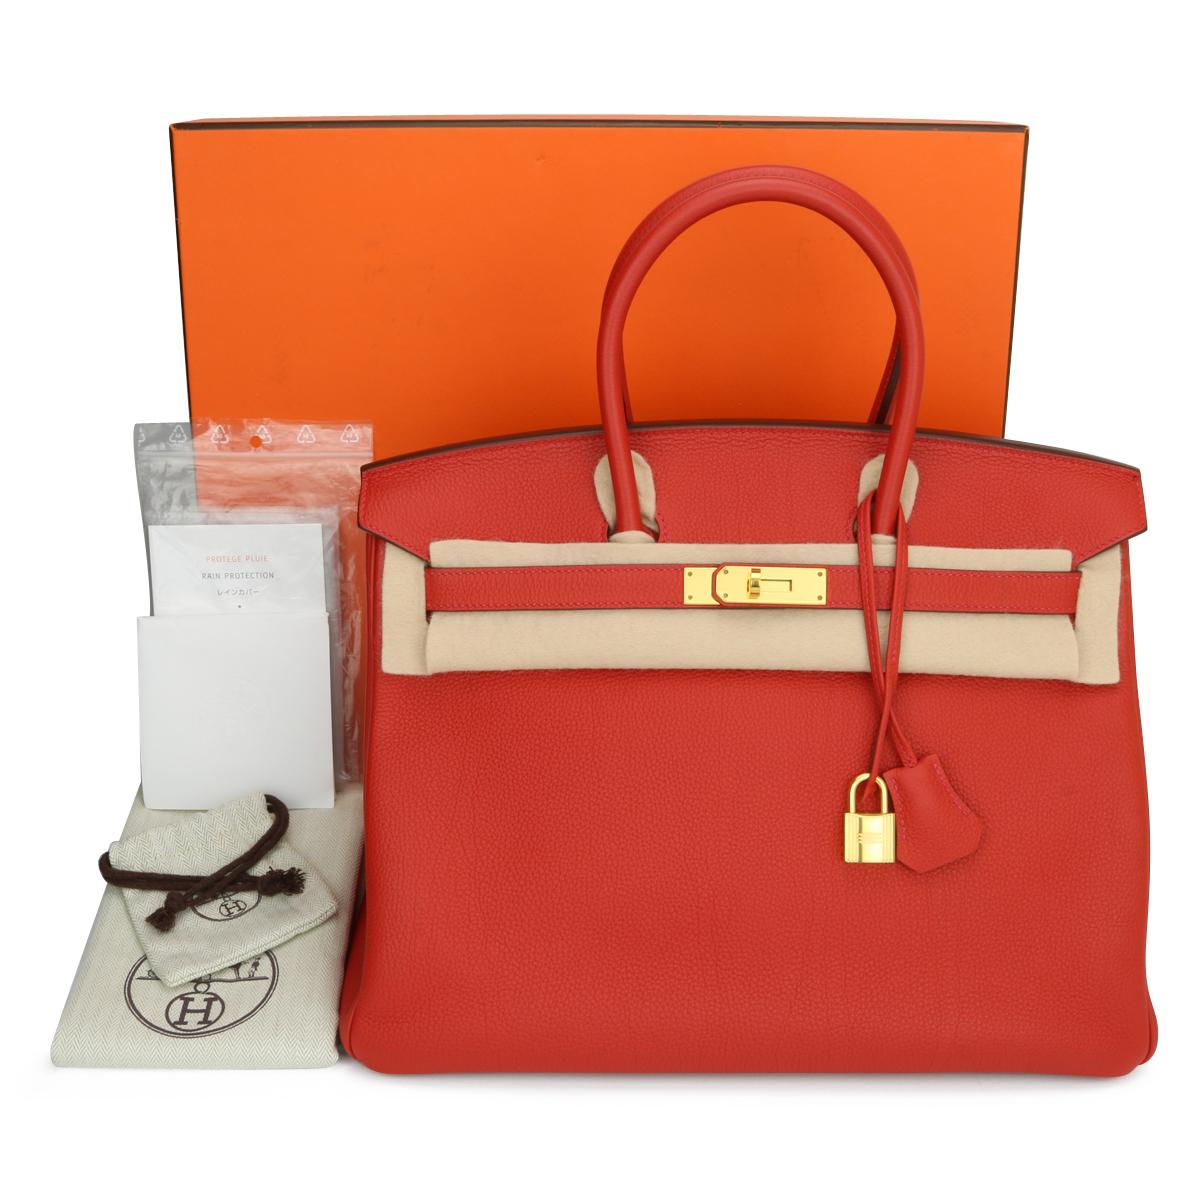 Hermès Birkin Bag 35cm Geranium Togo Leather with Gold Hardware Stamp A_Year 2017.

This bag is still in excellent condition. The leather still smells fresh as when new, and it still holds to the shape very well. The hardware is still very shiny and